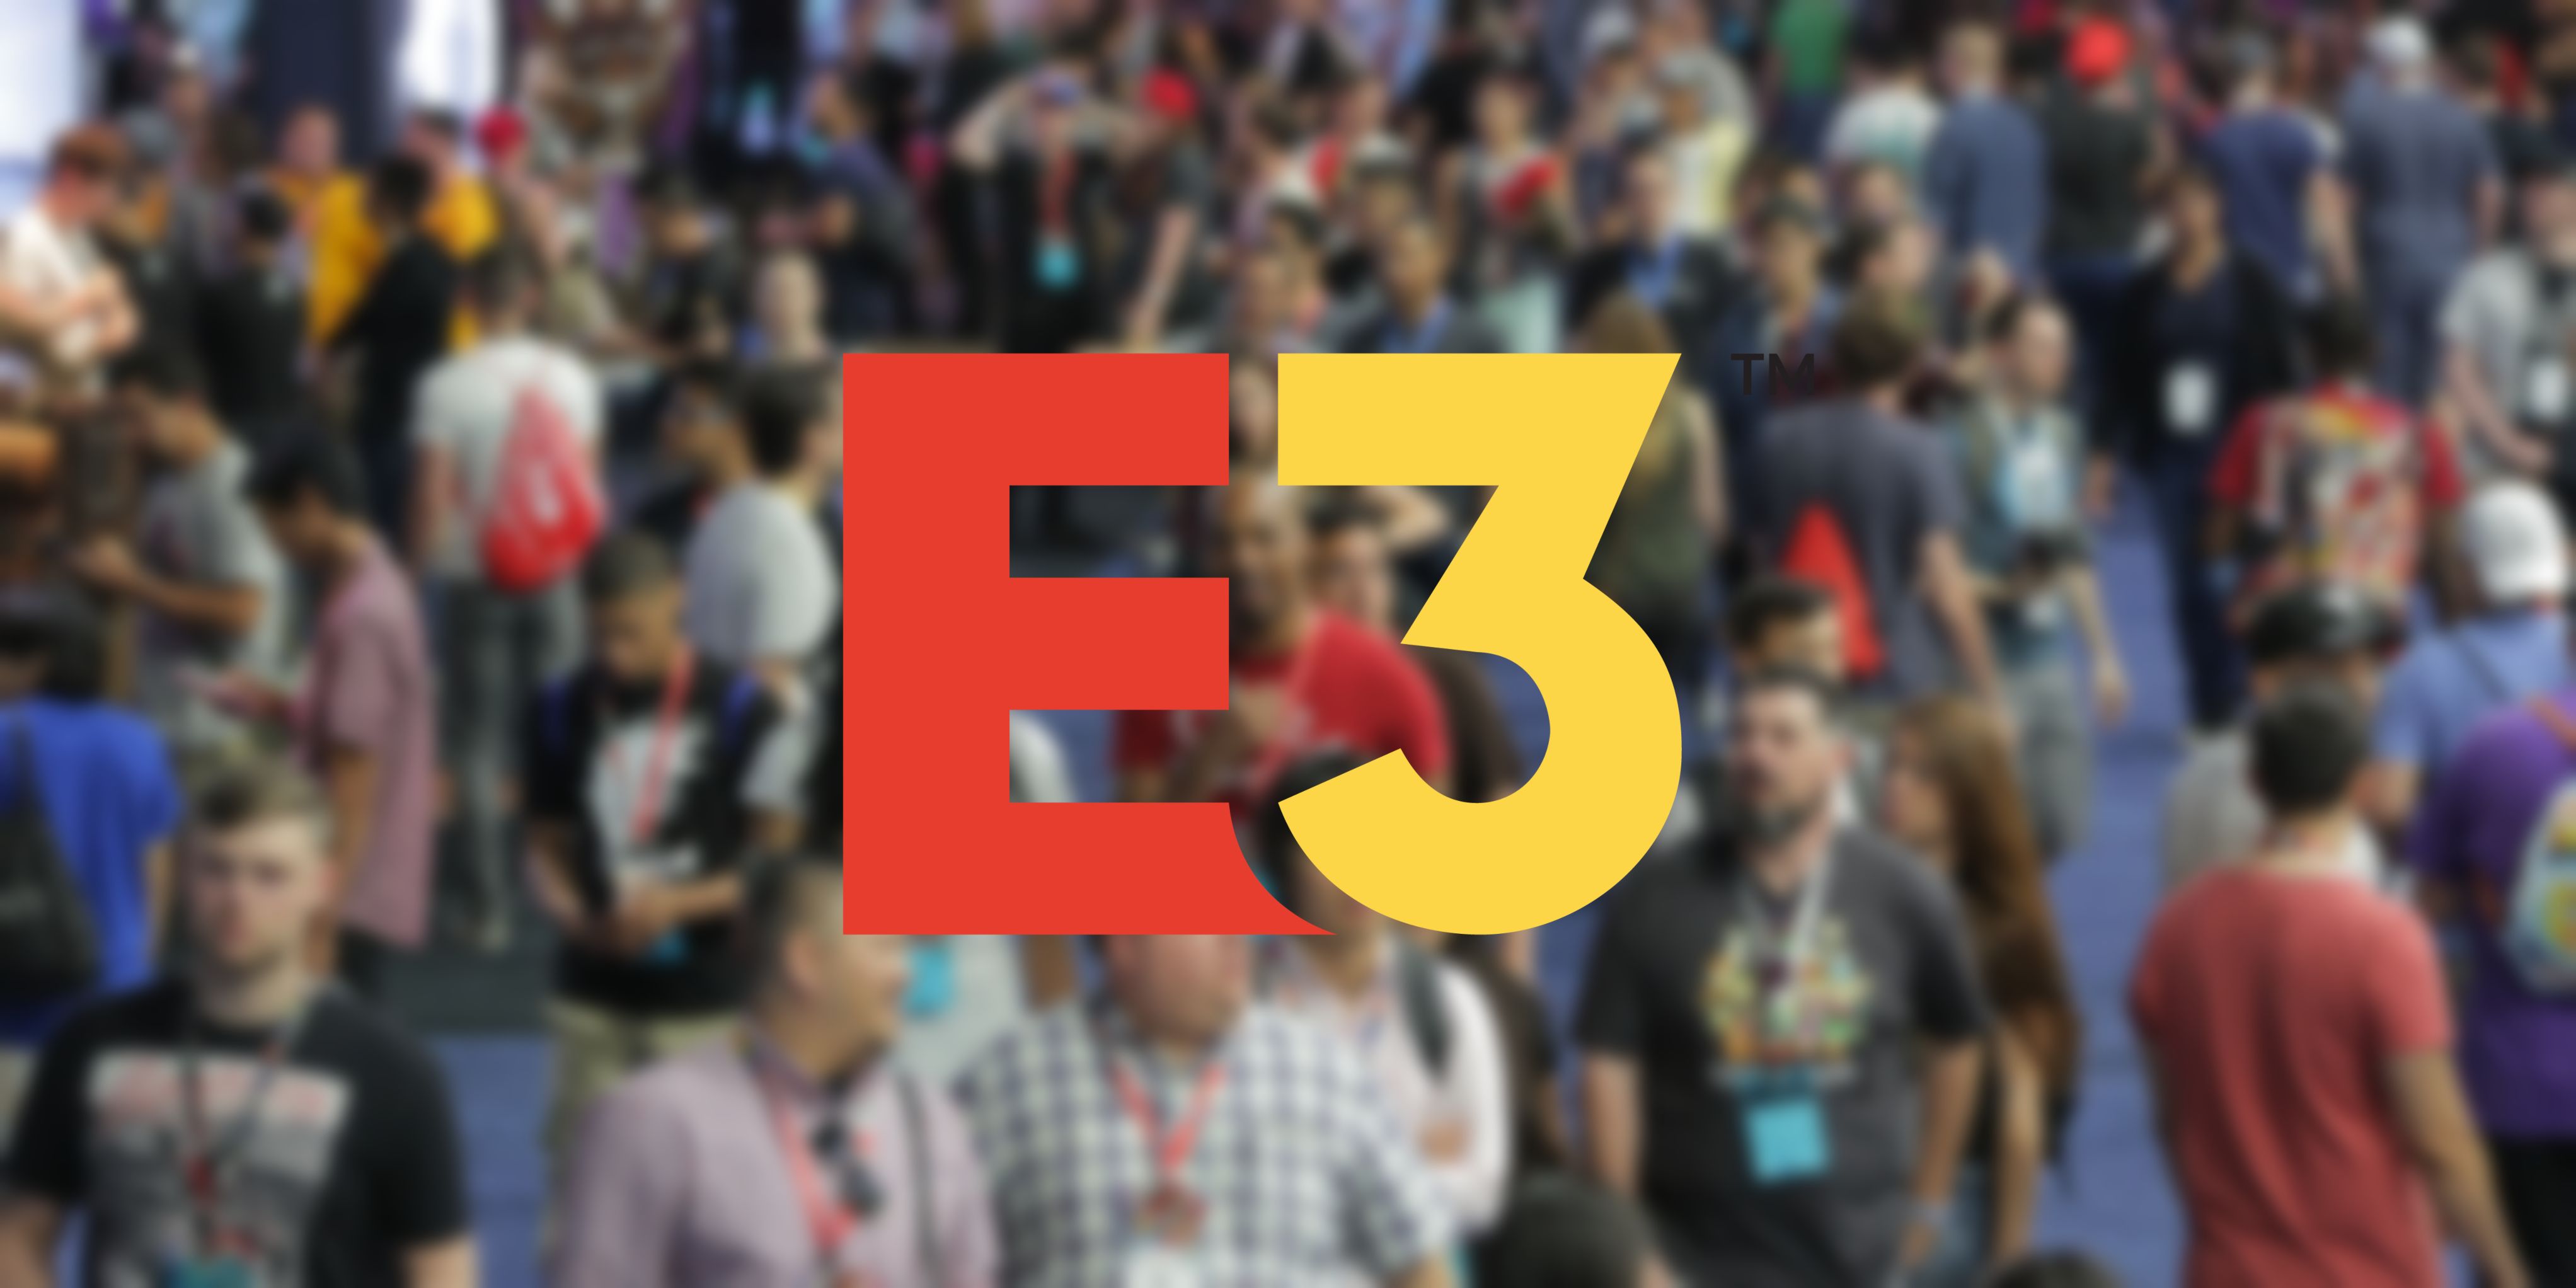 E3 2020 Games Trailers and Conferences to Expect and Which Are Skipping